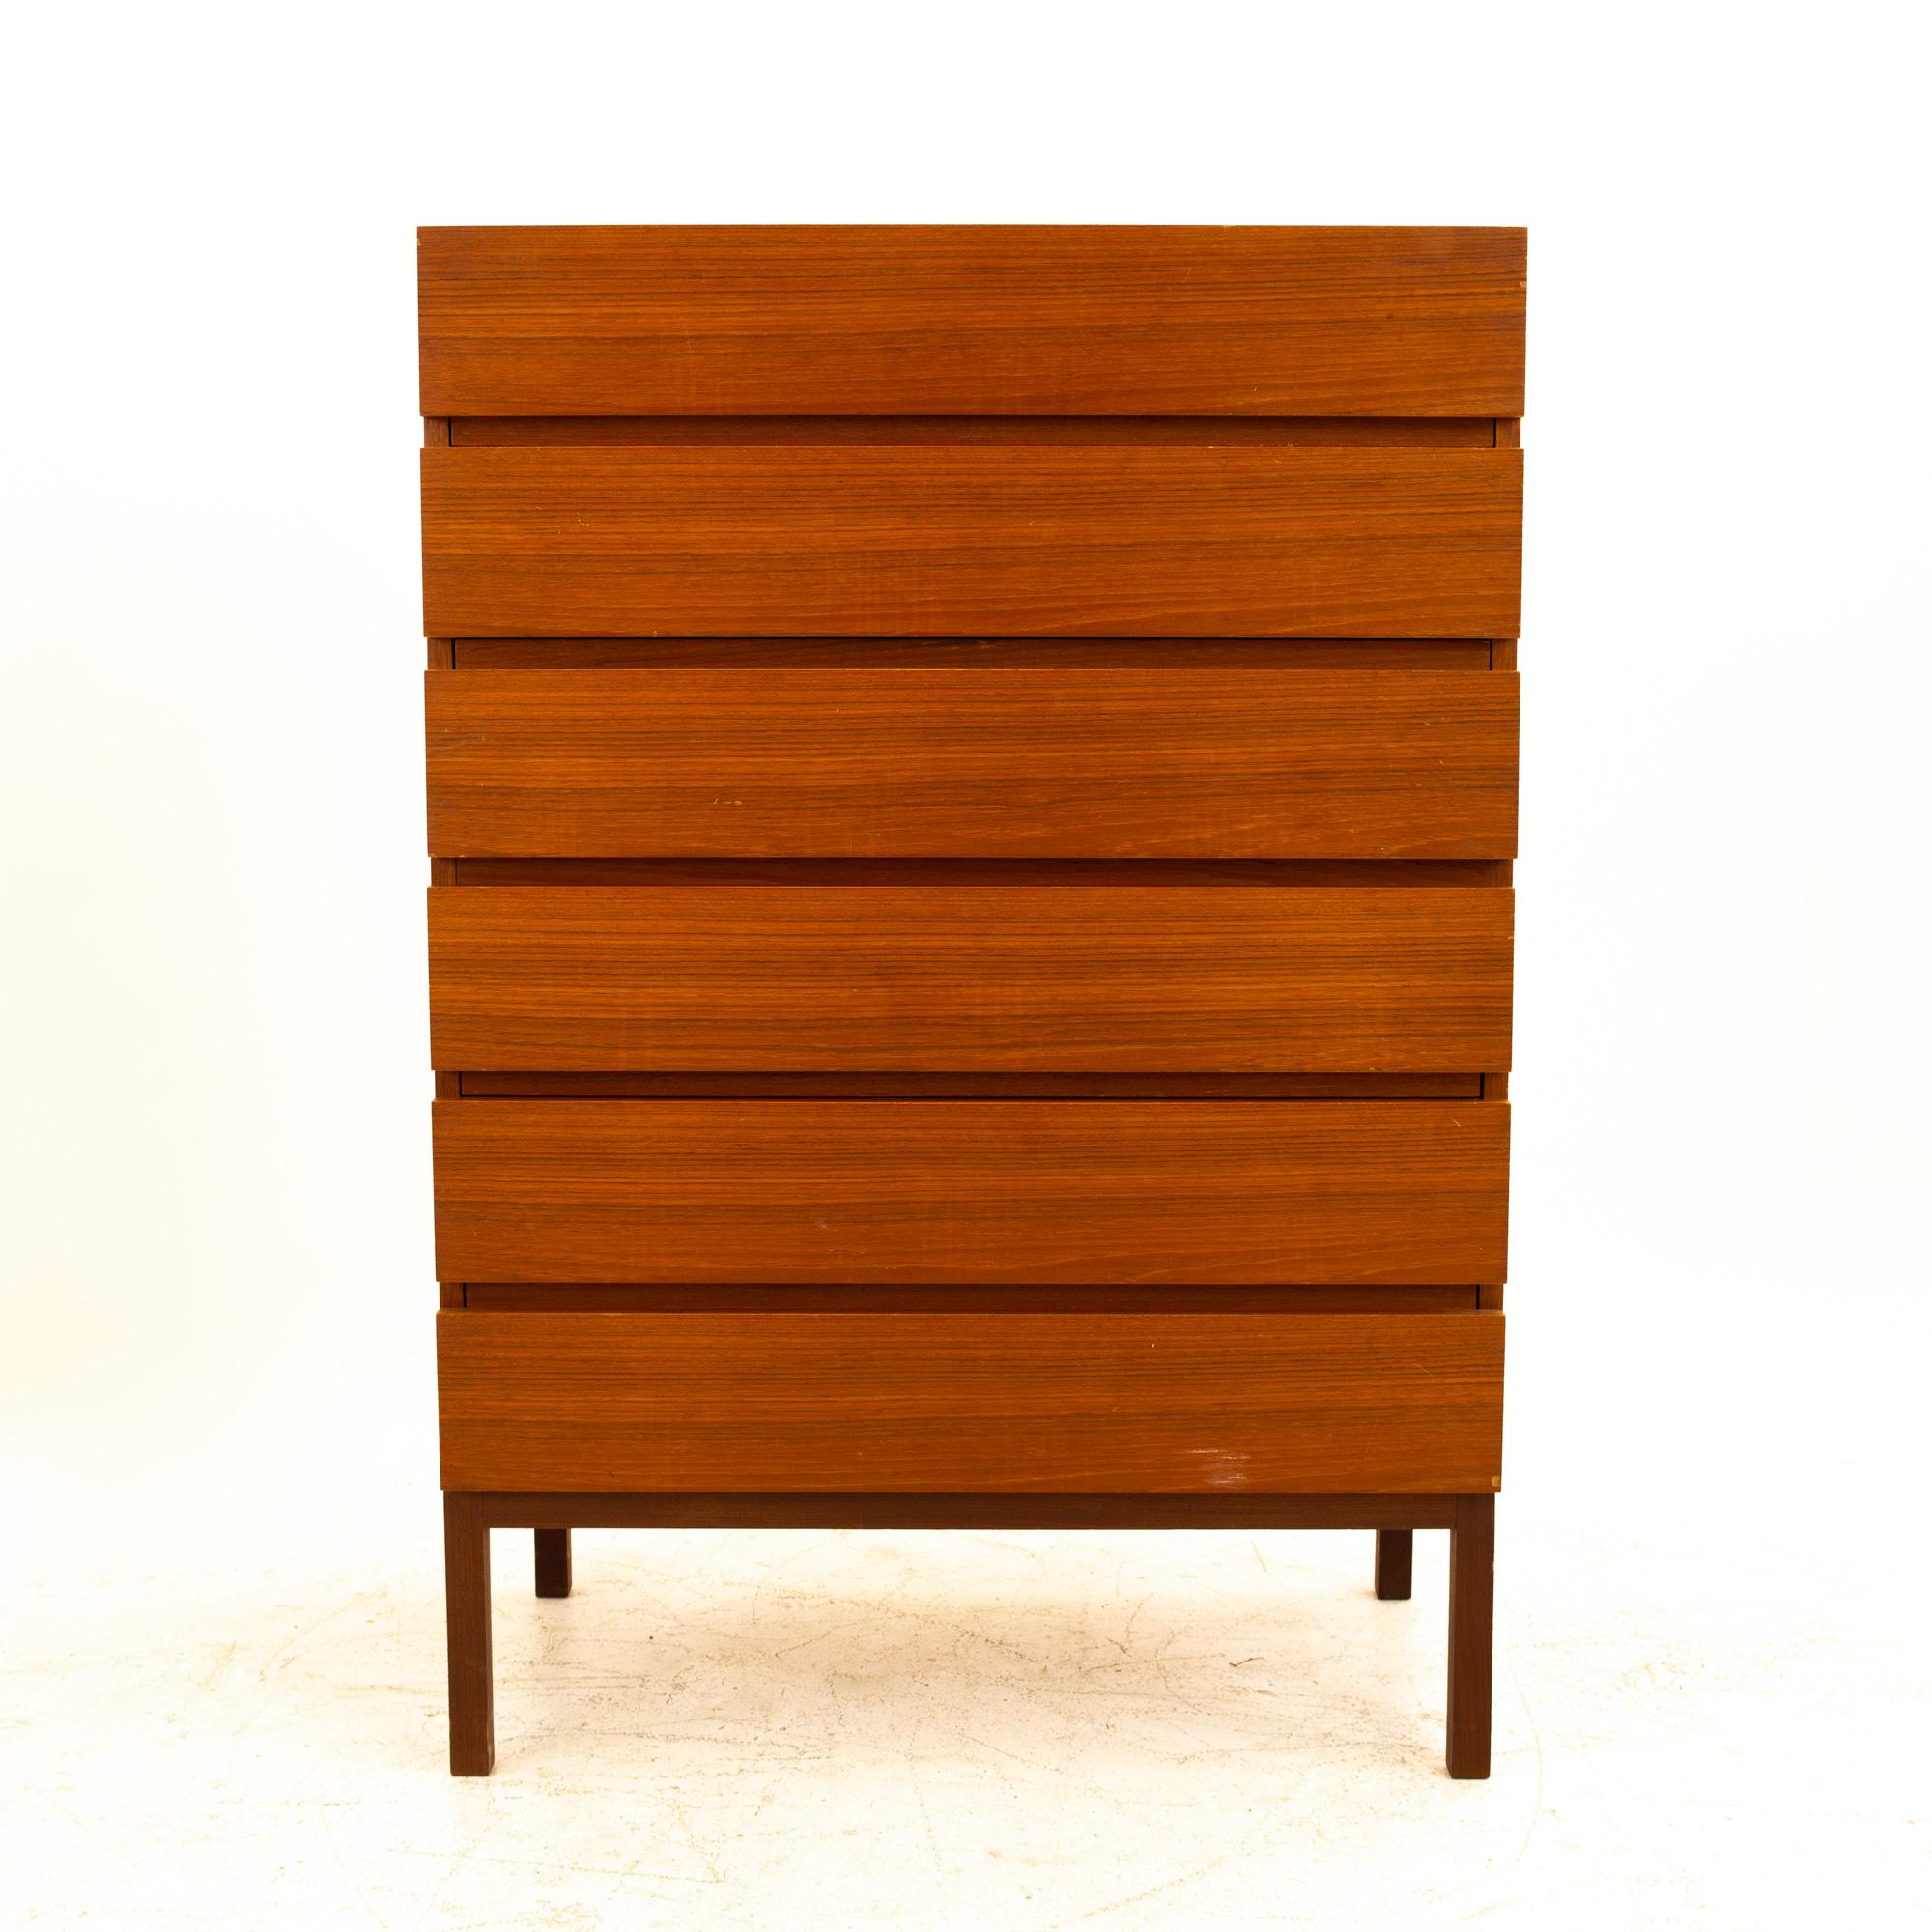 Reff Mid Century teak 5-drawer highboy dresser
Dresser measures: 31.5 wide x 18.75 deep x 46 high

All pieces of furniture can be had in what we call restored vintage condition. That means the piece is restored upon purchase so it’s free of